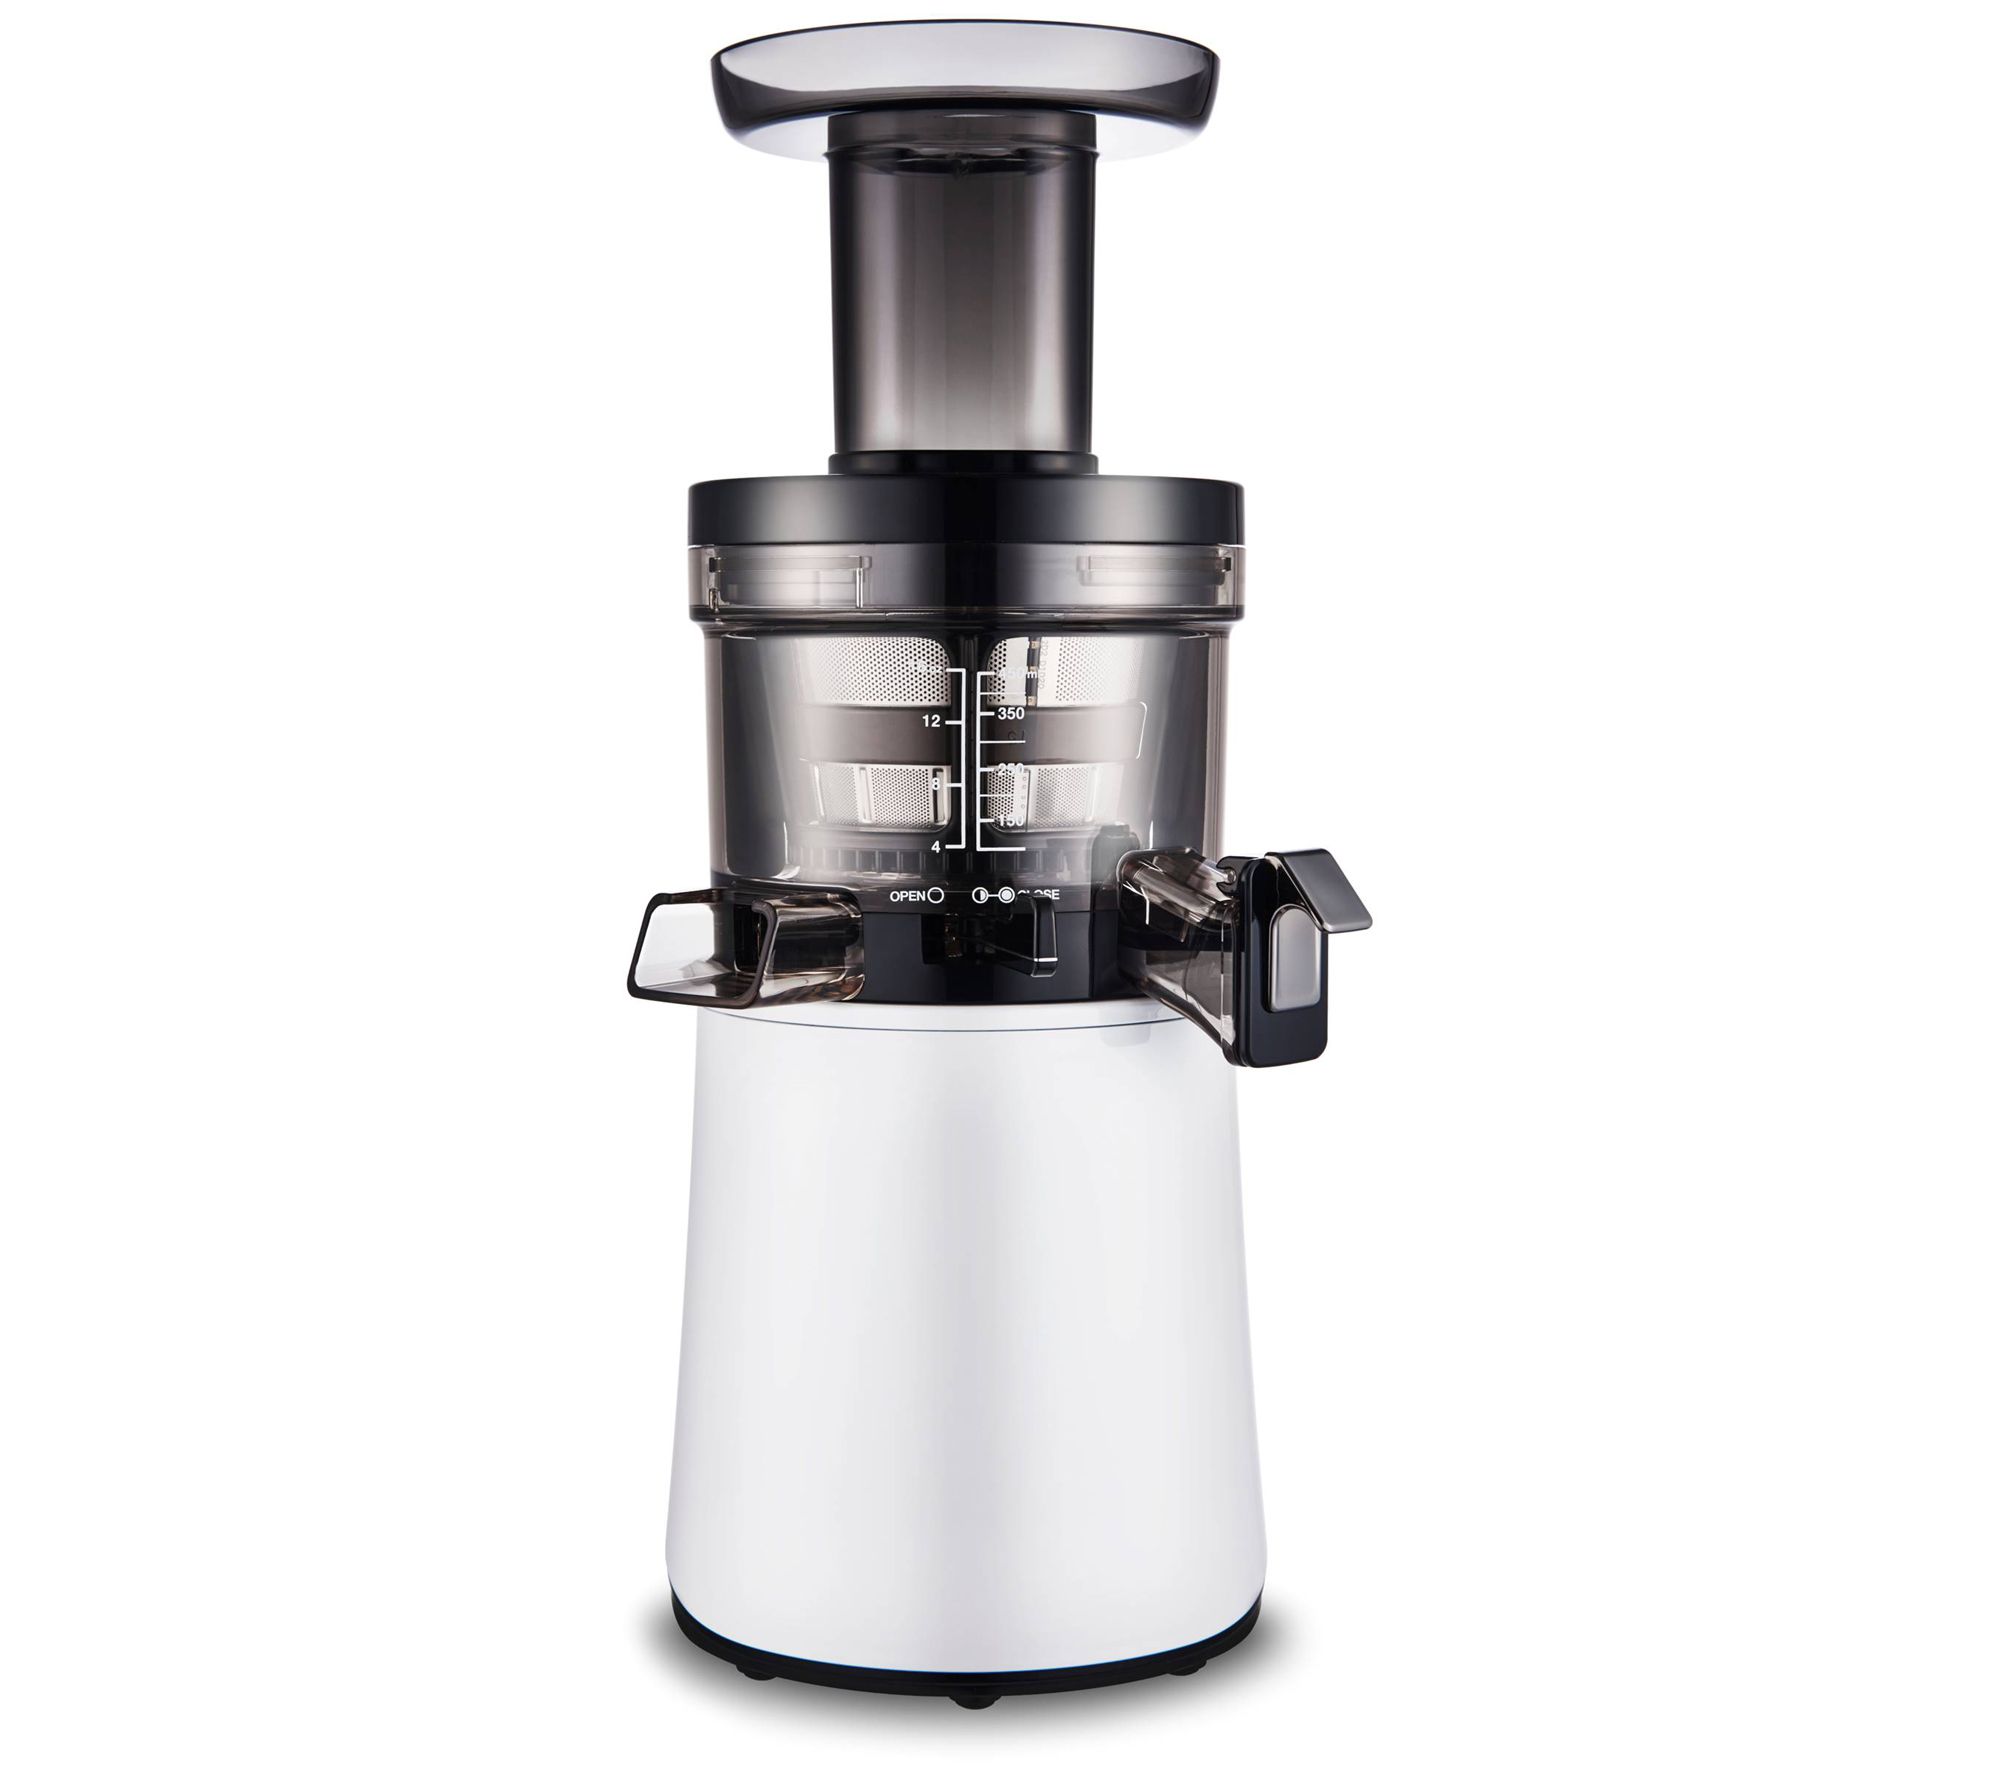 Hurom Alpha H-AA Slow Juicer - White 